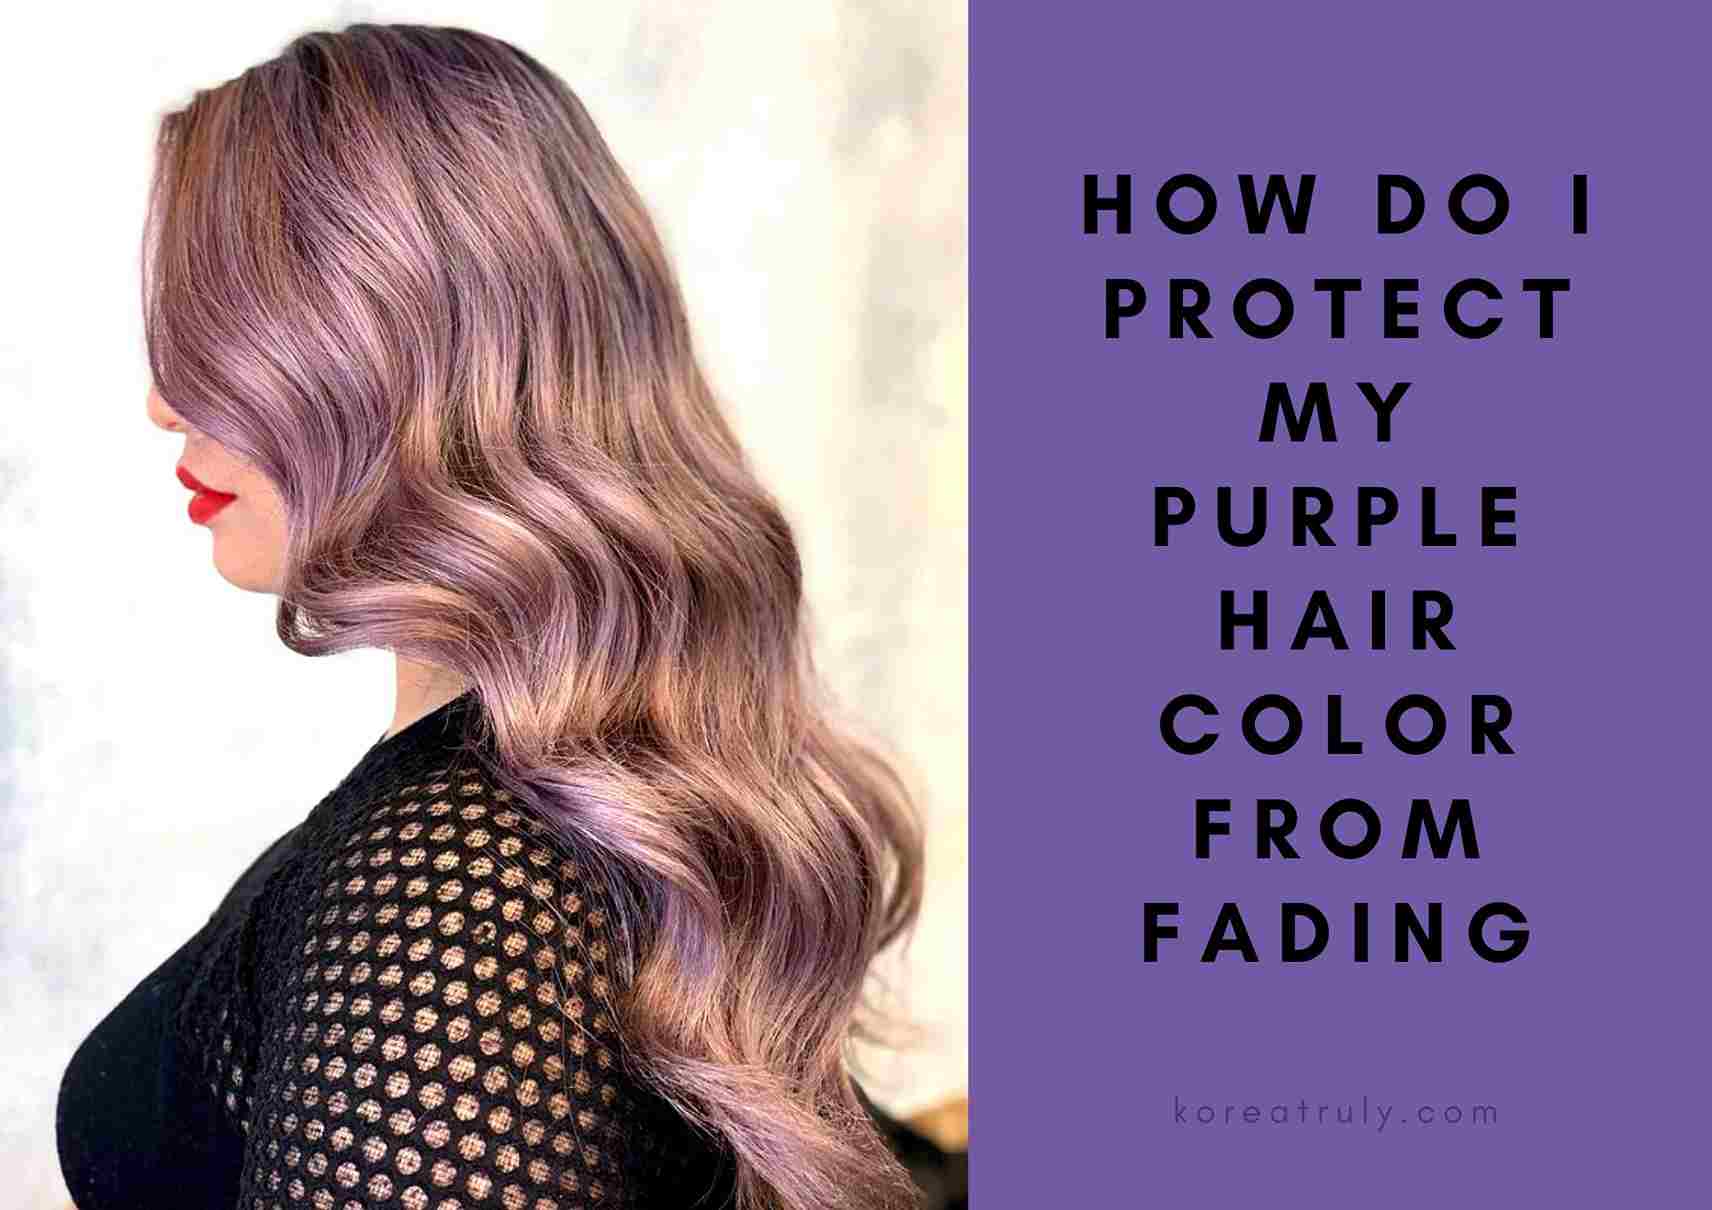 How To Keep Purple Hair Color From Fading | 8 Easy Tips To Take Care Of Hair  - Hair Everyday Review